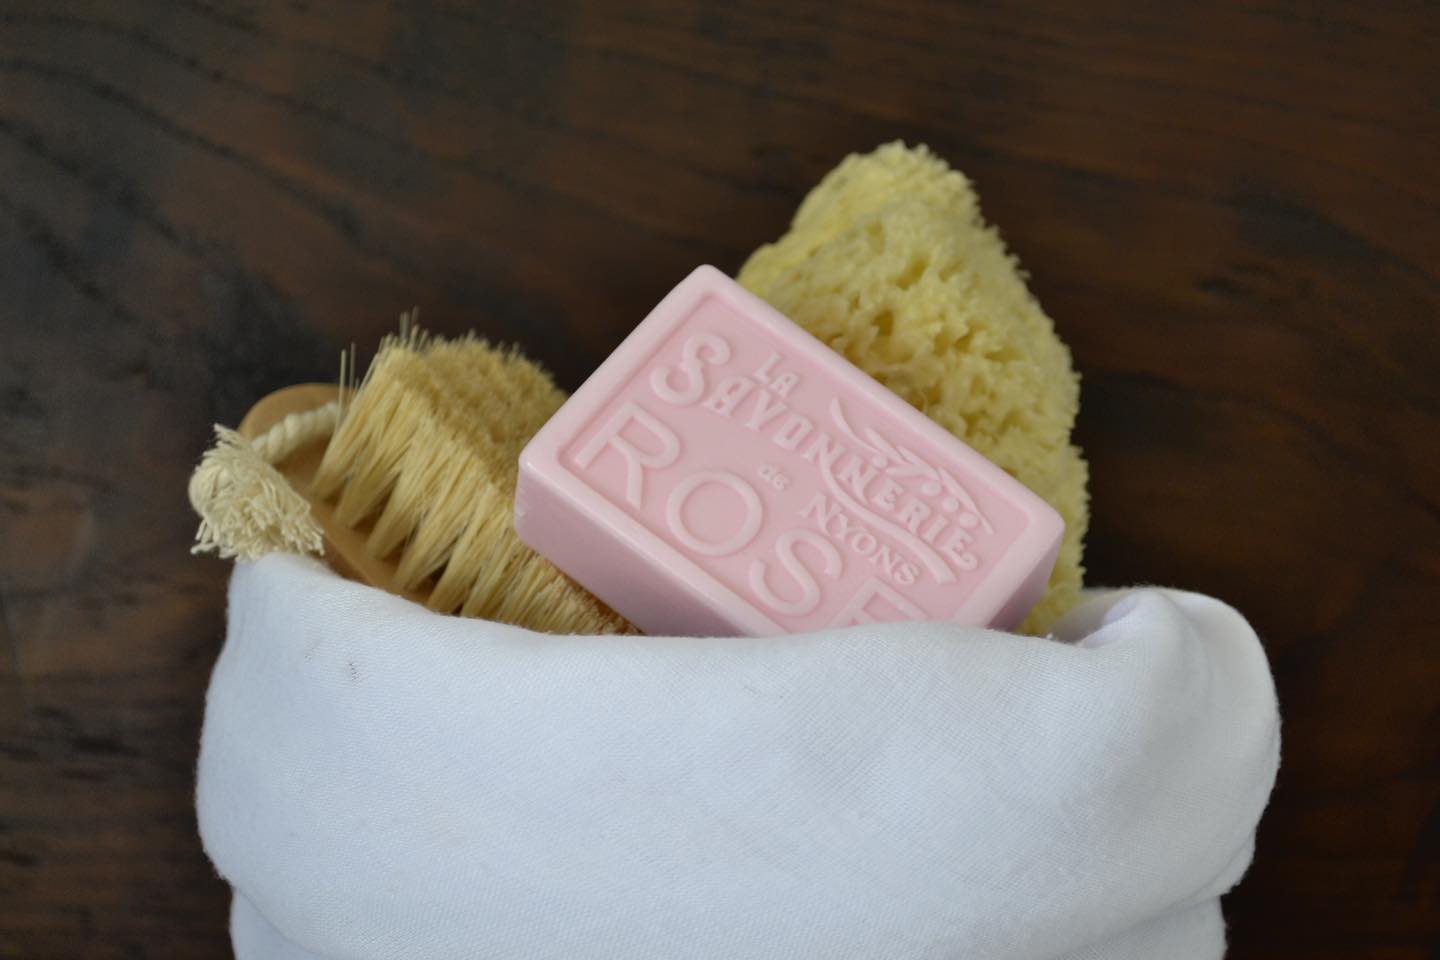 Pink bar of soap with the words La Savonnerie de Nyons Rose on it, wrapped in a towel along with a body scrub brush and sponge.